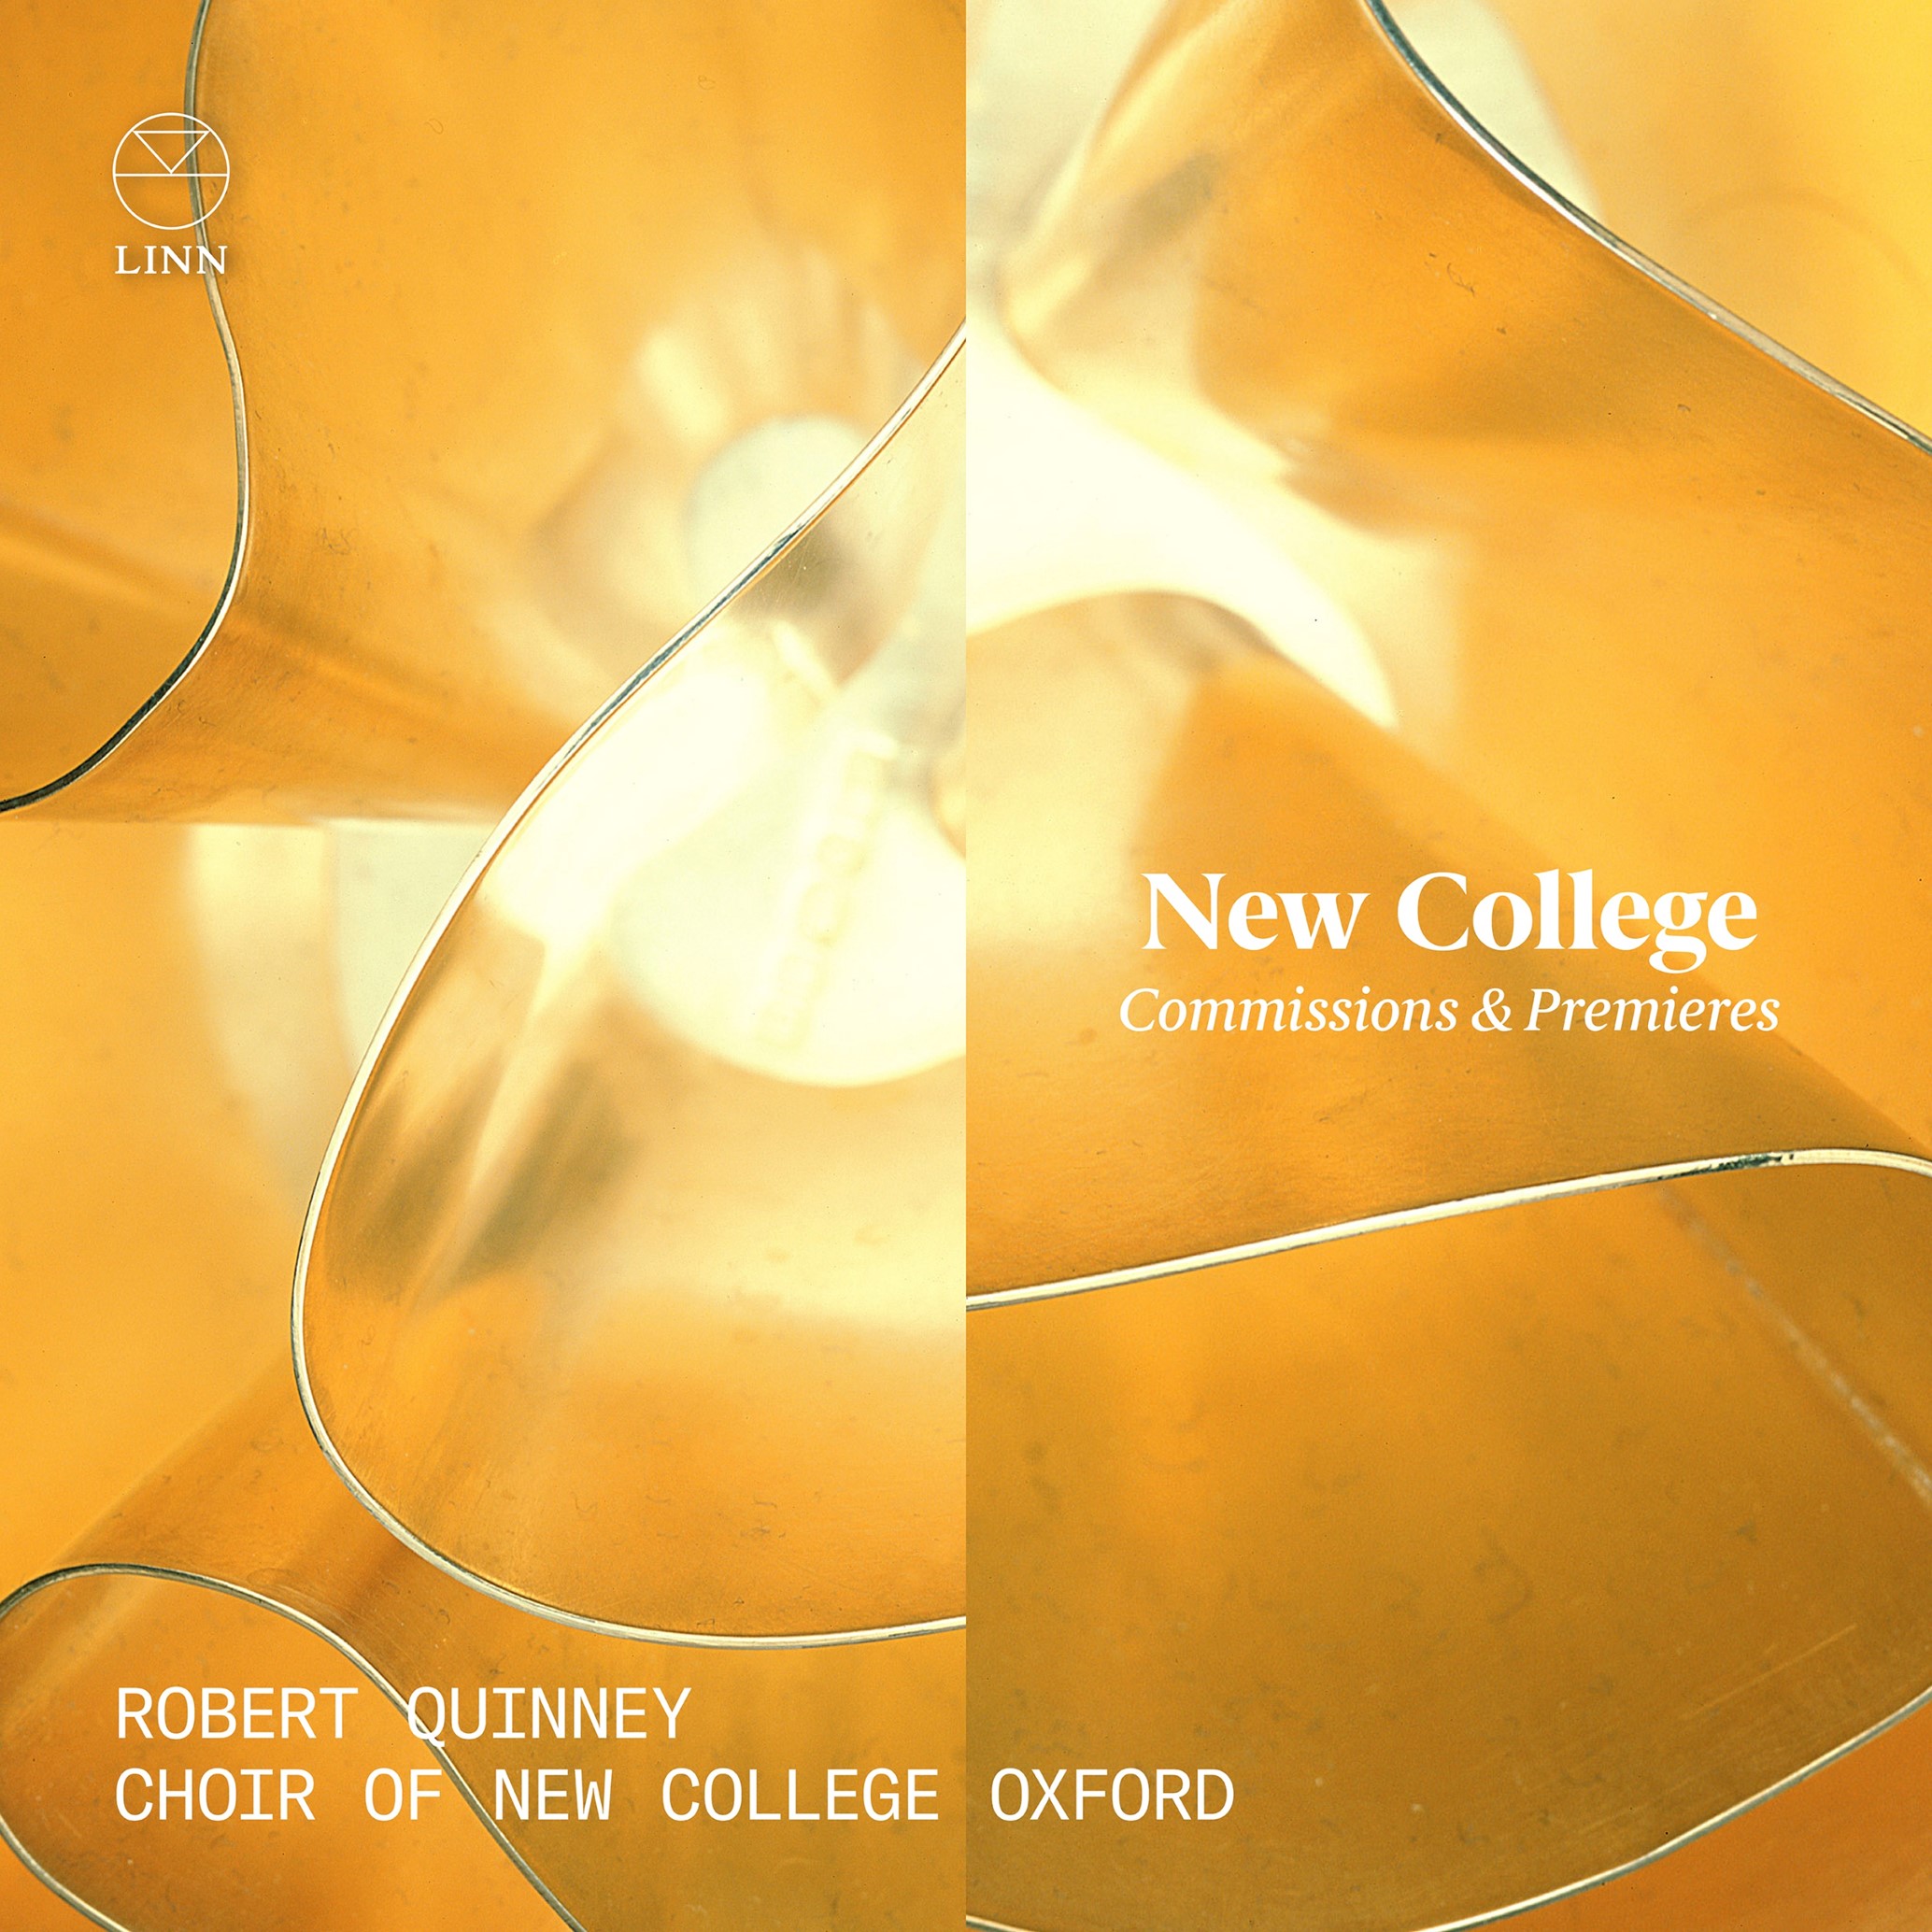 The cover of "Commissions & Premieres" by New College Choir